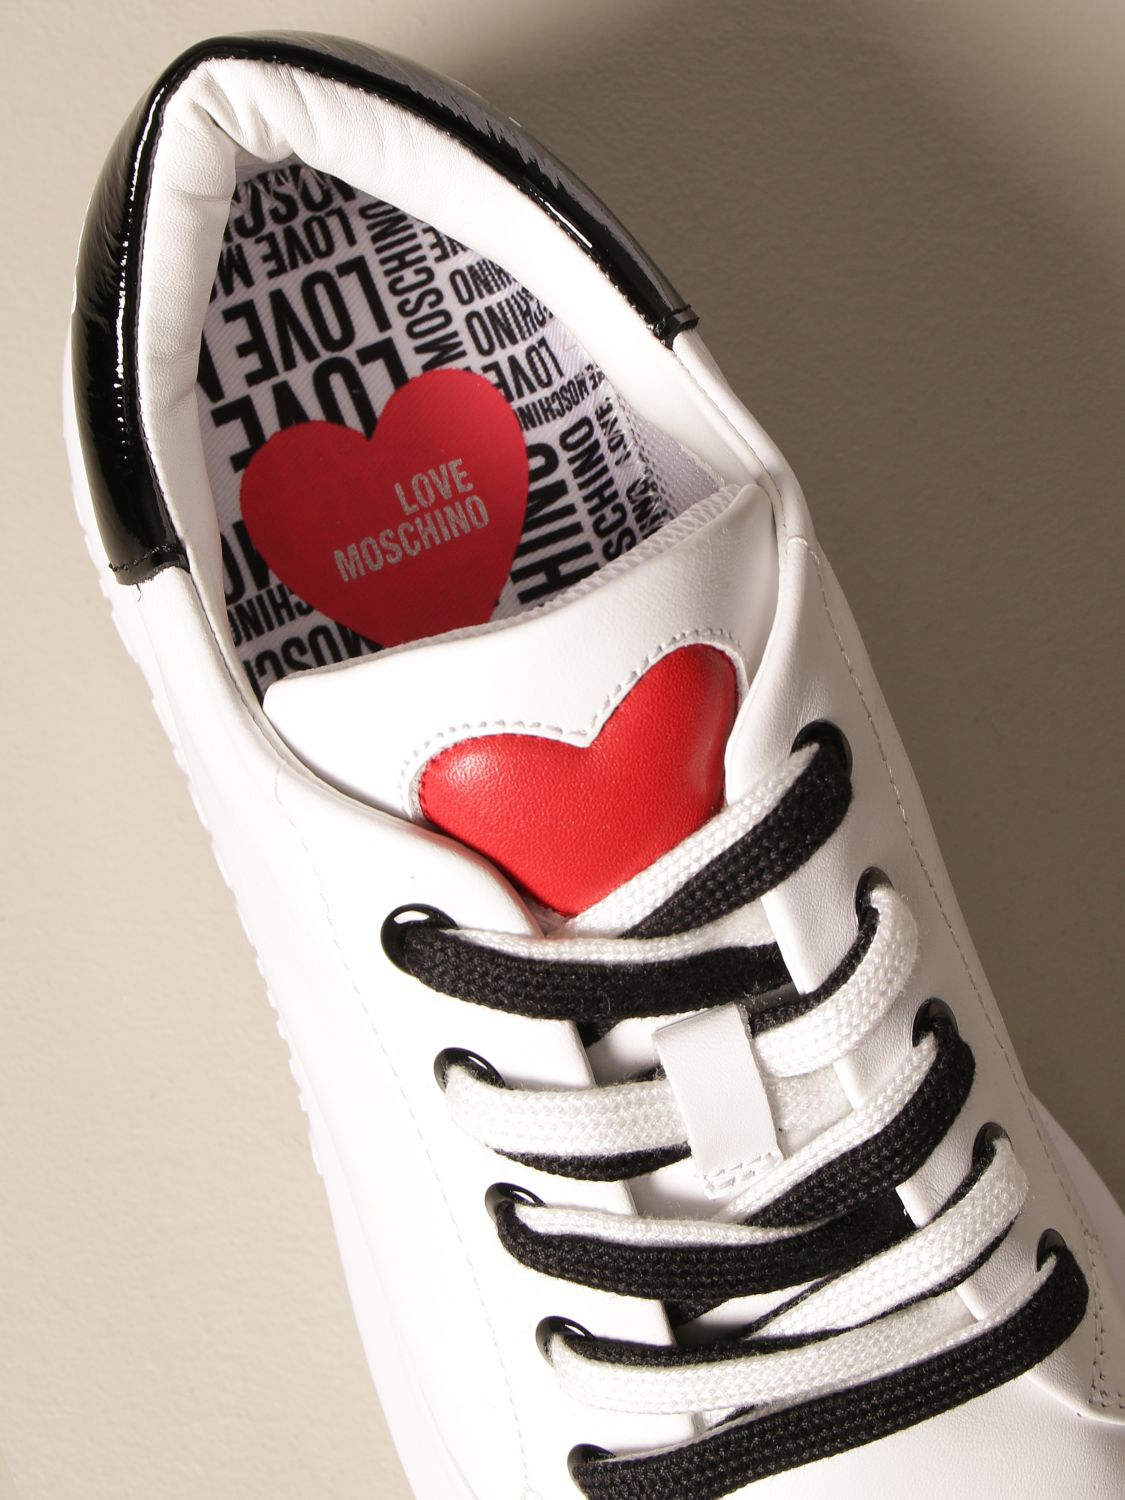 love moschino heart shoes